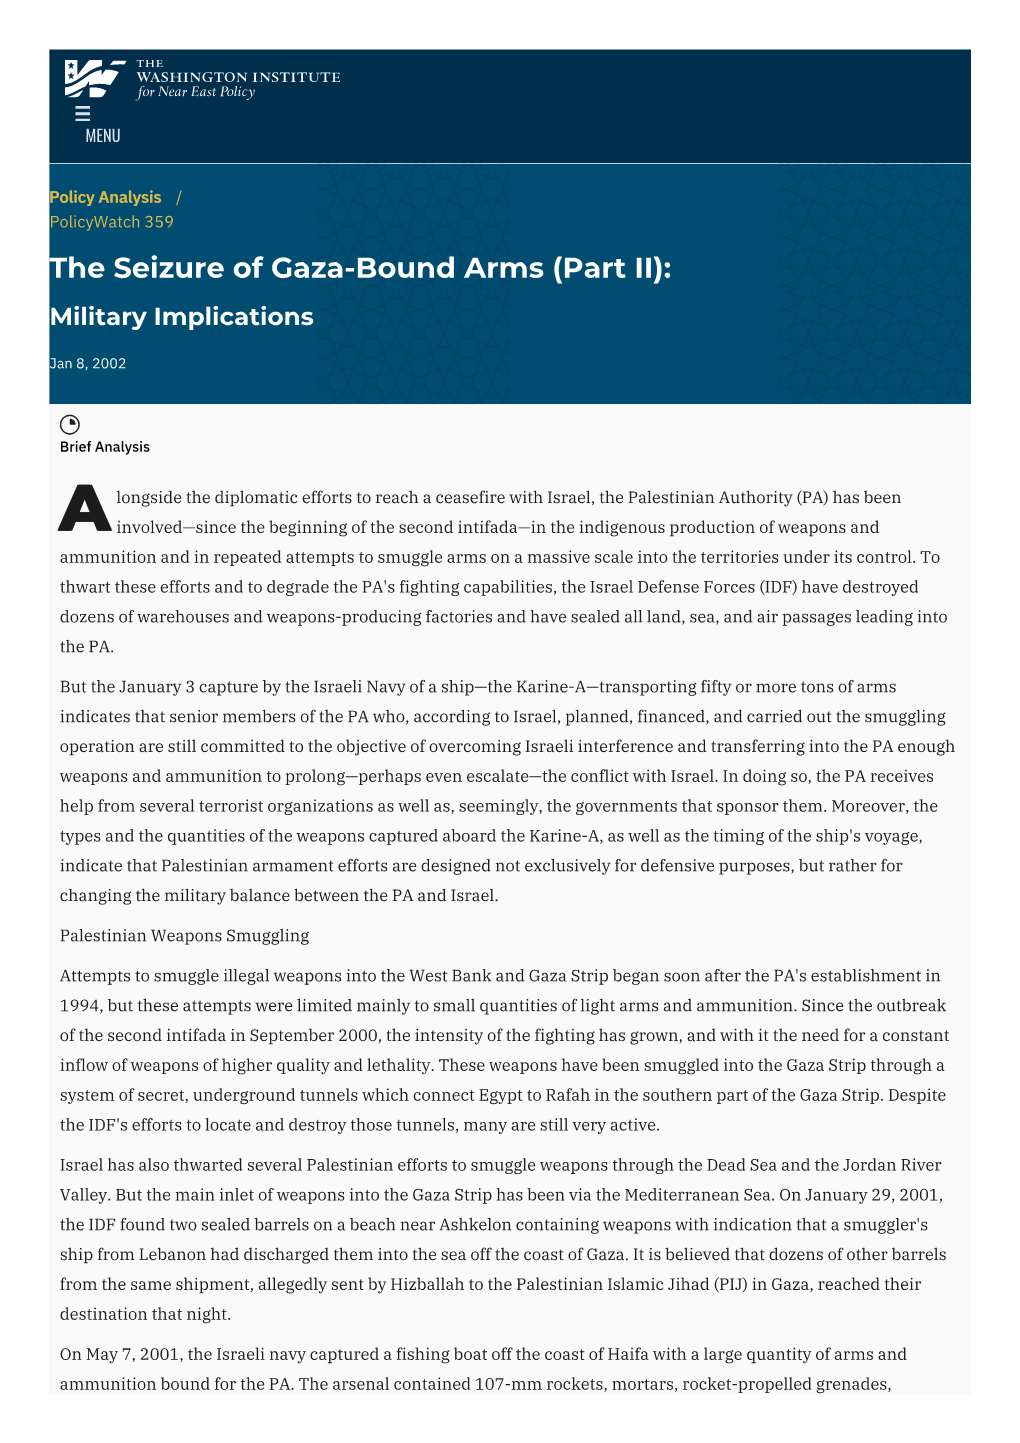 The Seizure of Gaza-Bound Arms (Part II): Military Implications | The